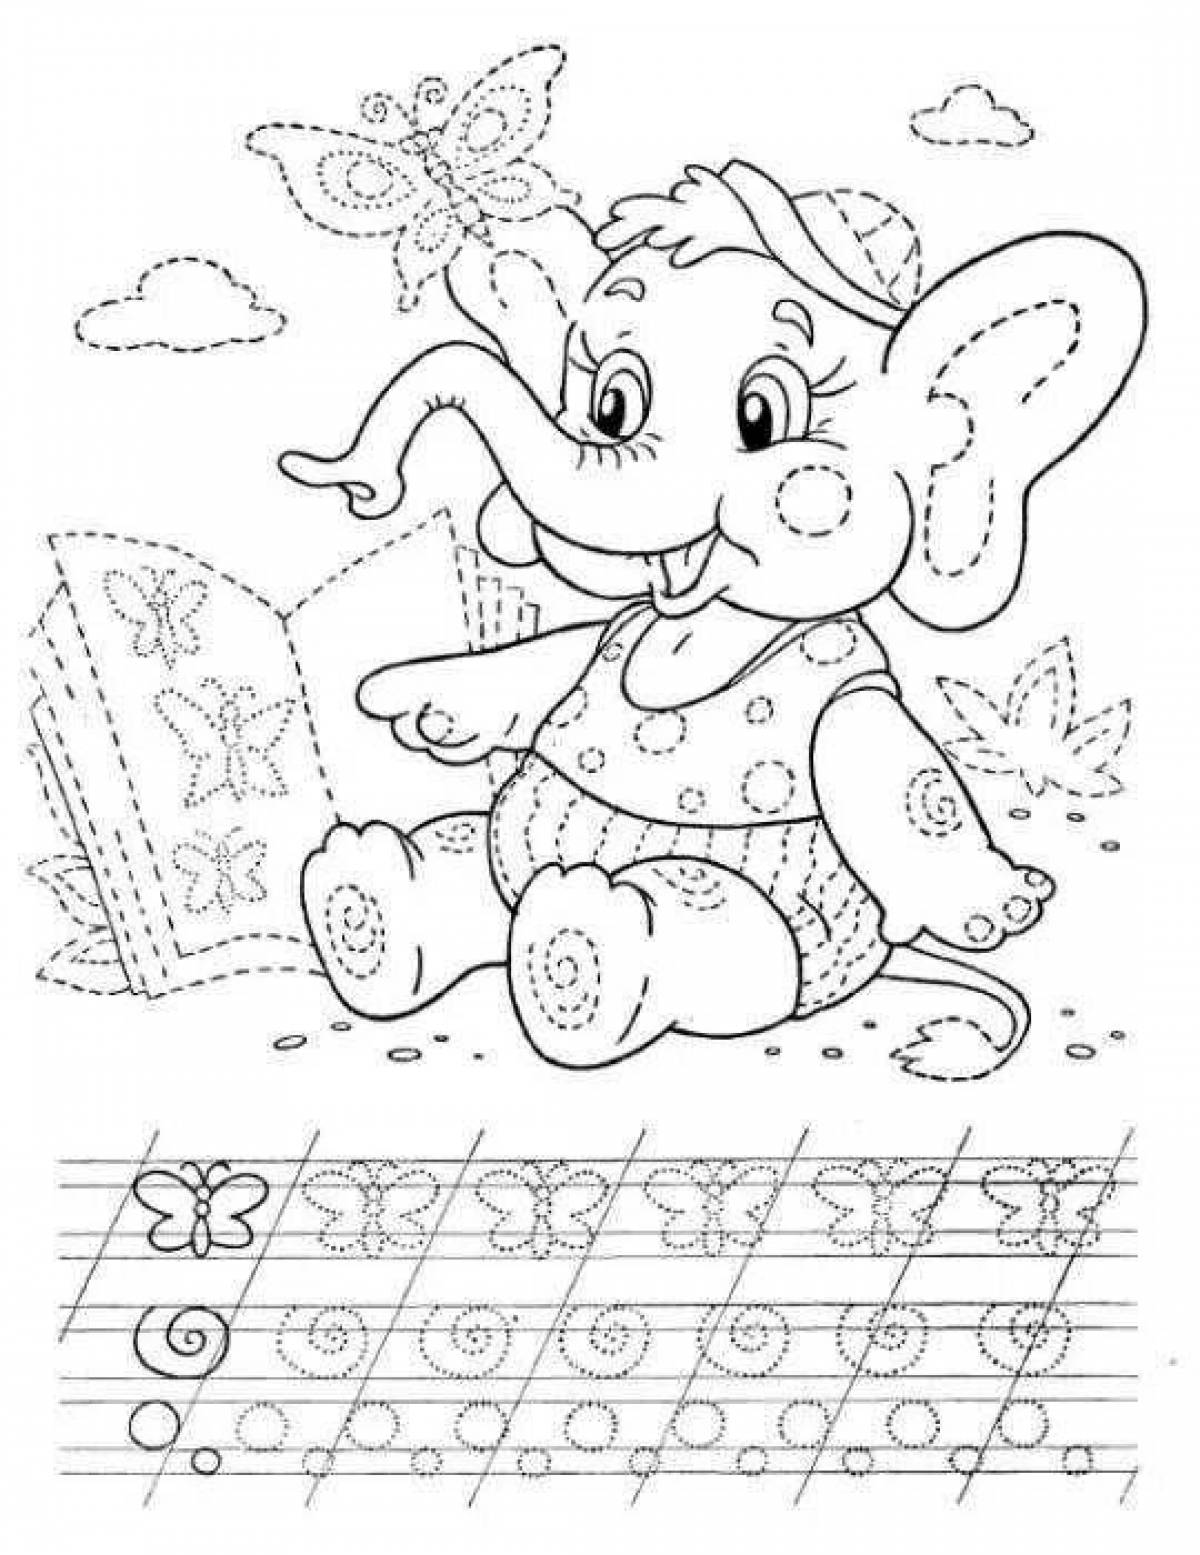 Engaging coloring book with recipe for kids